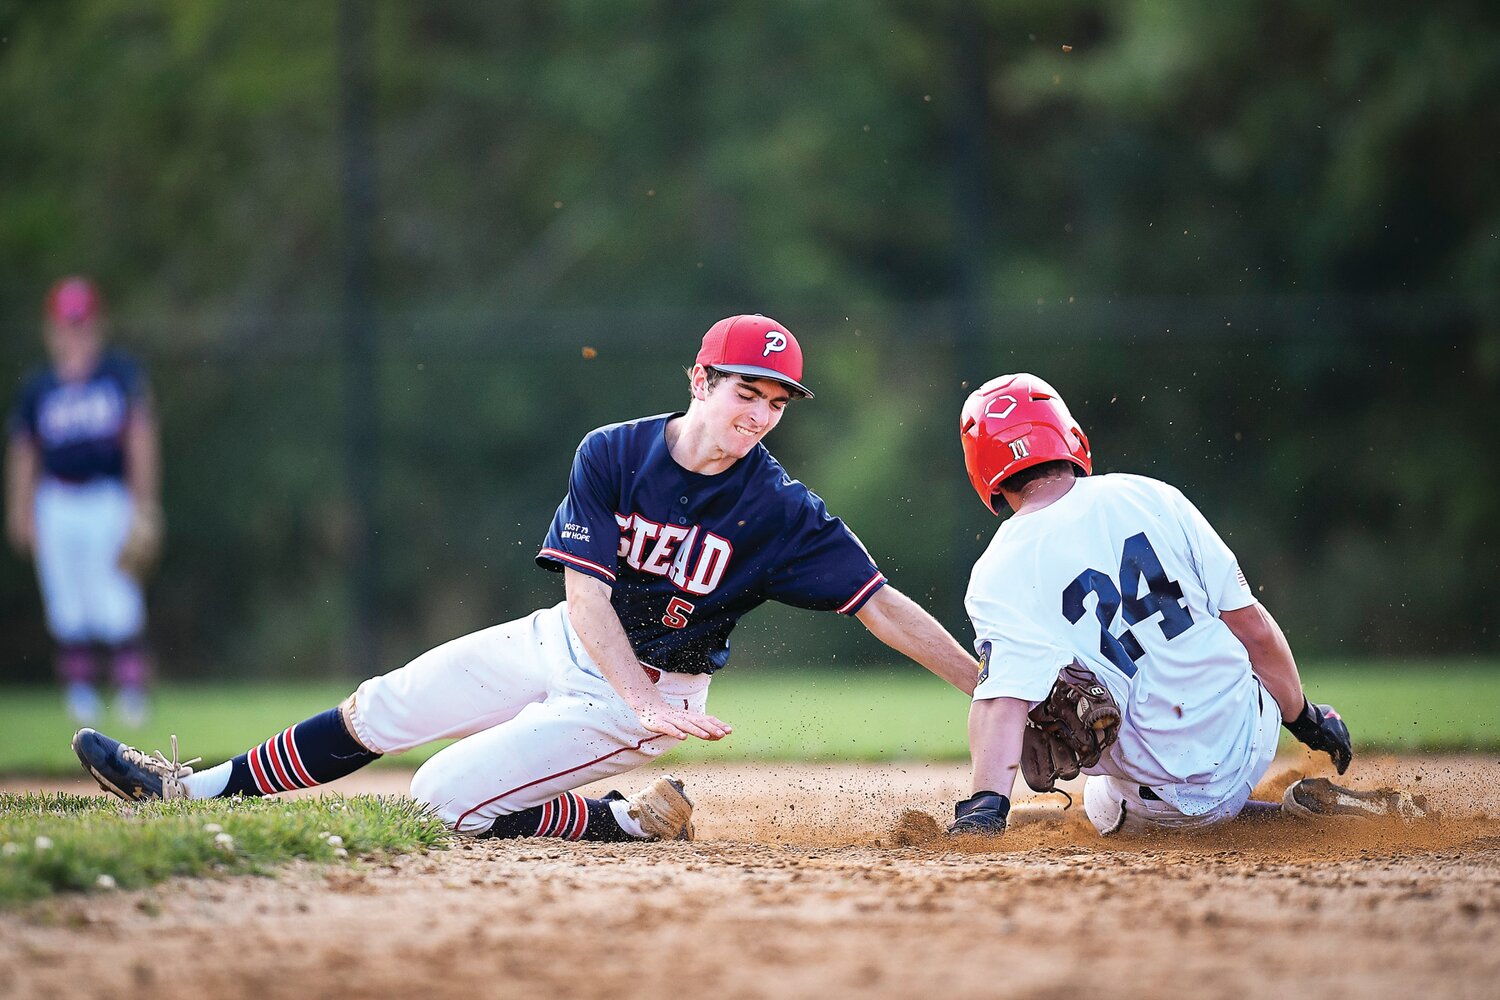 Doylestown’s Noah Gerstein steals second in the top of the sixth inning.